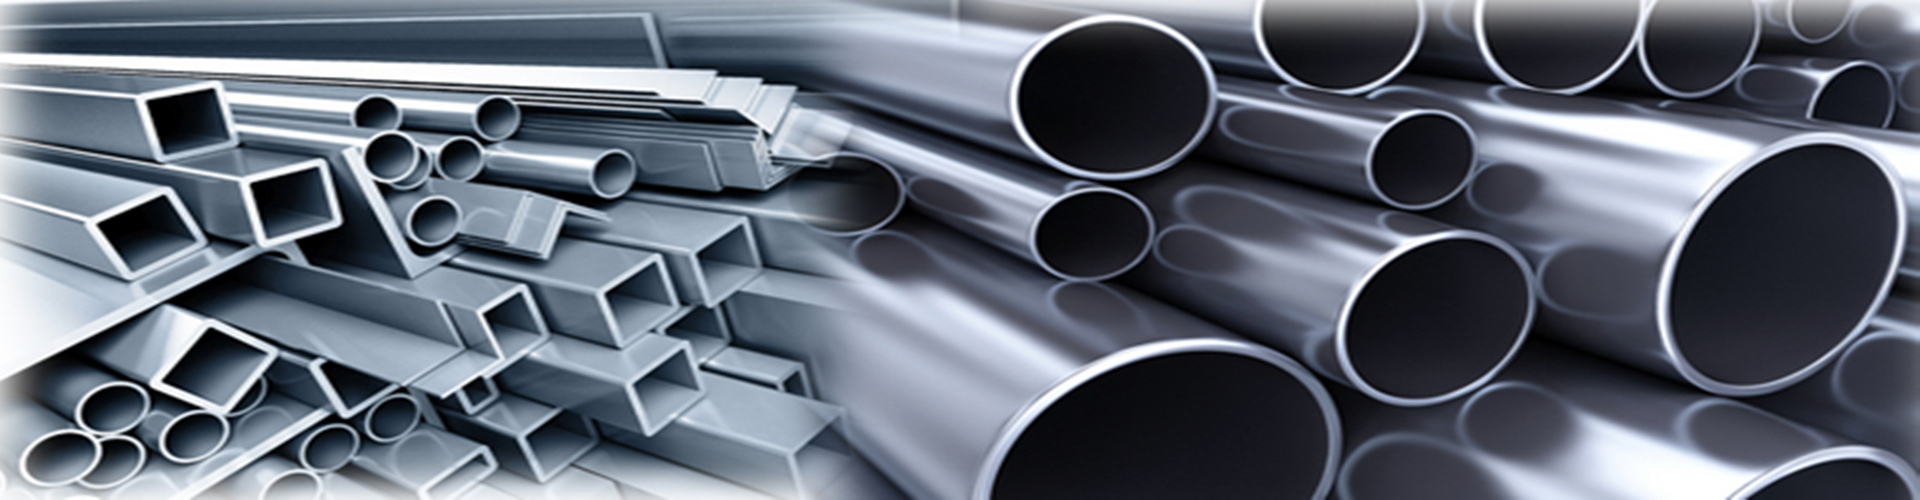 stainless-steel-pipes-tubes-manufacturer-exporter